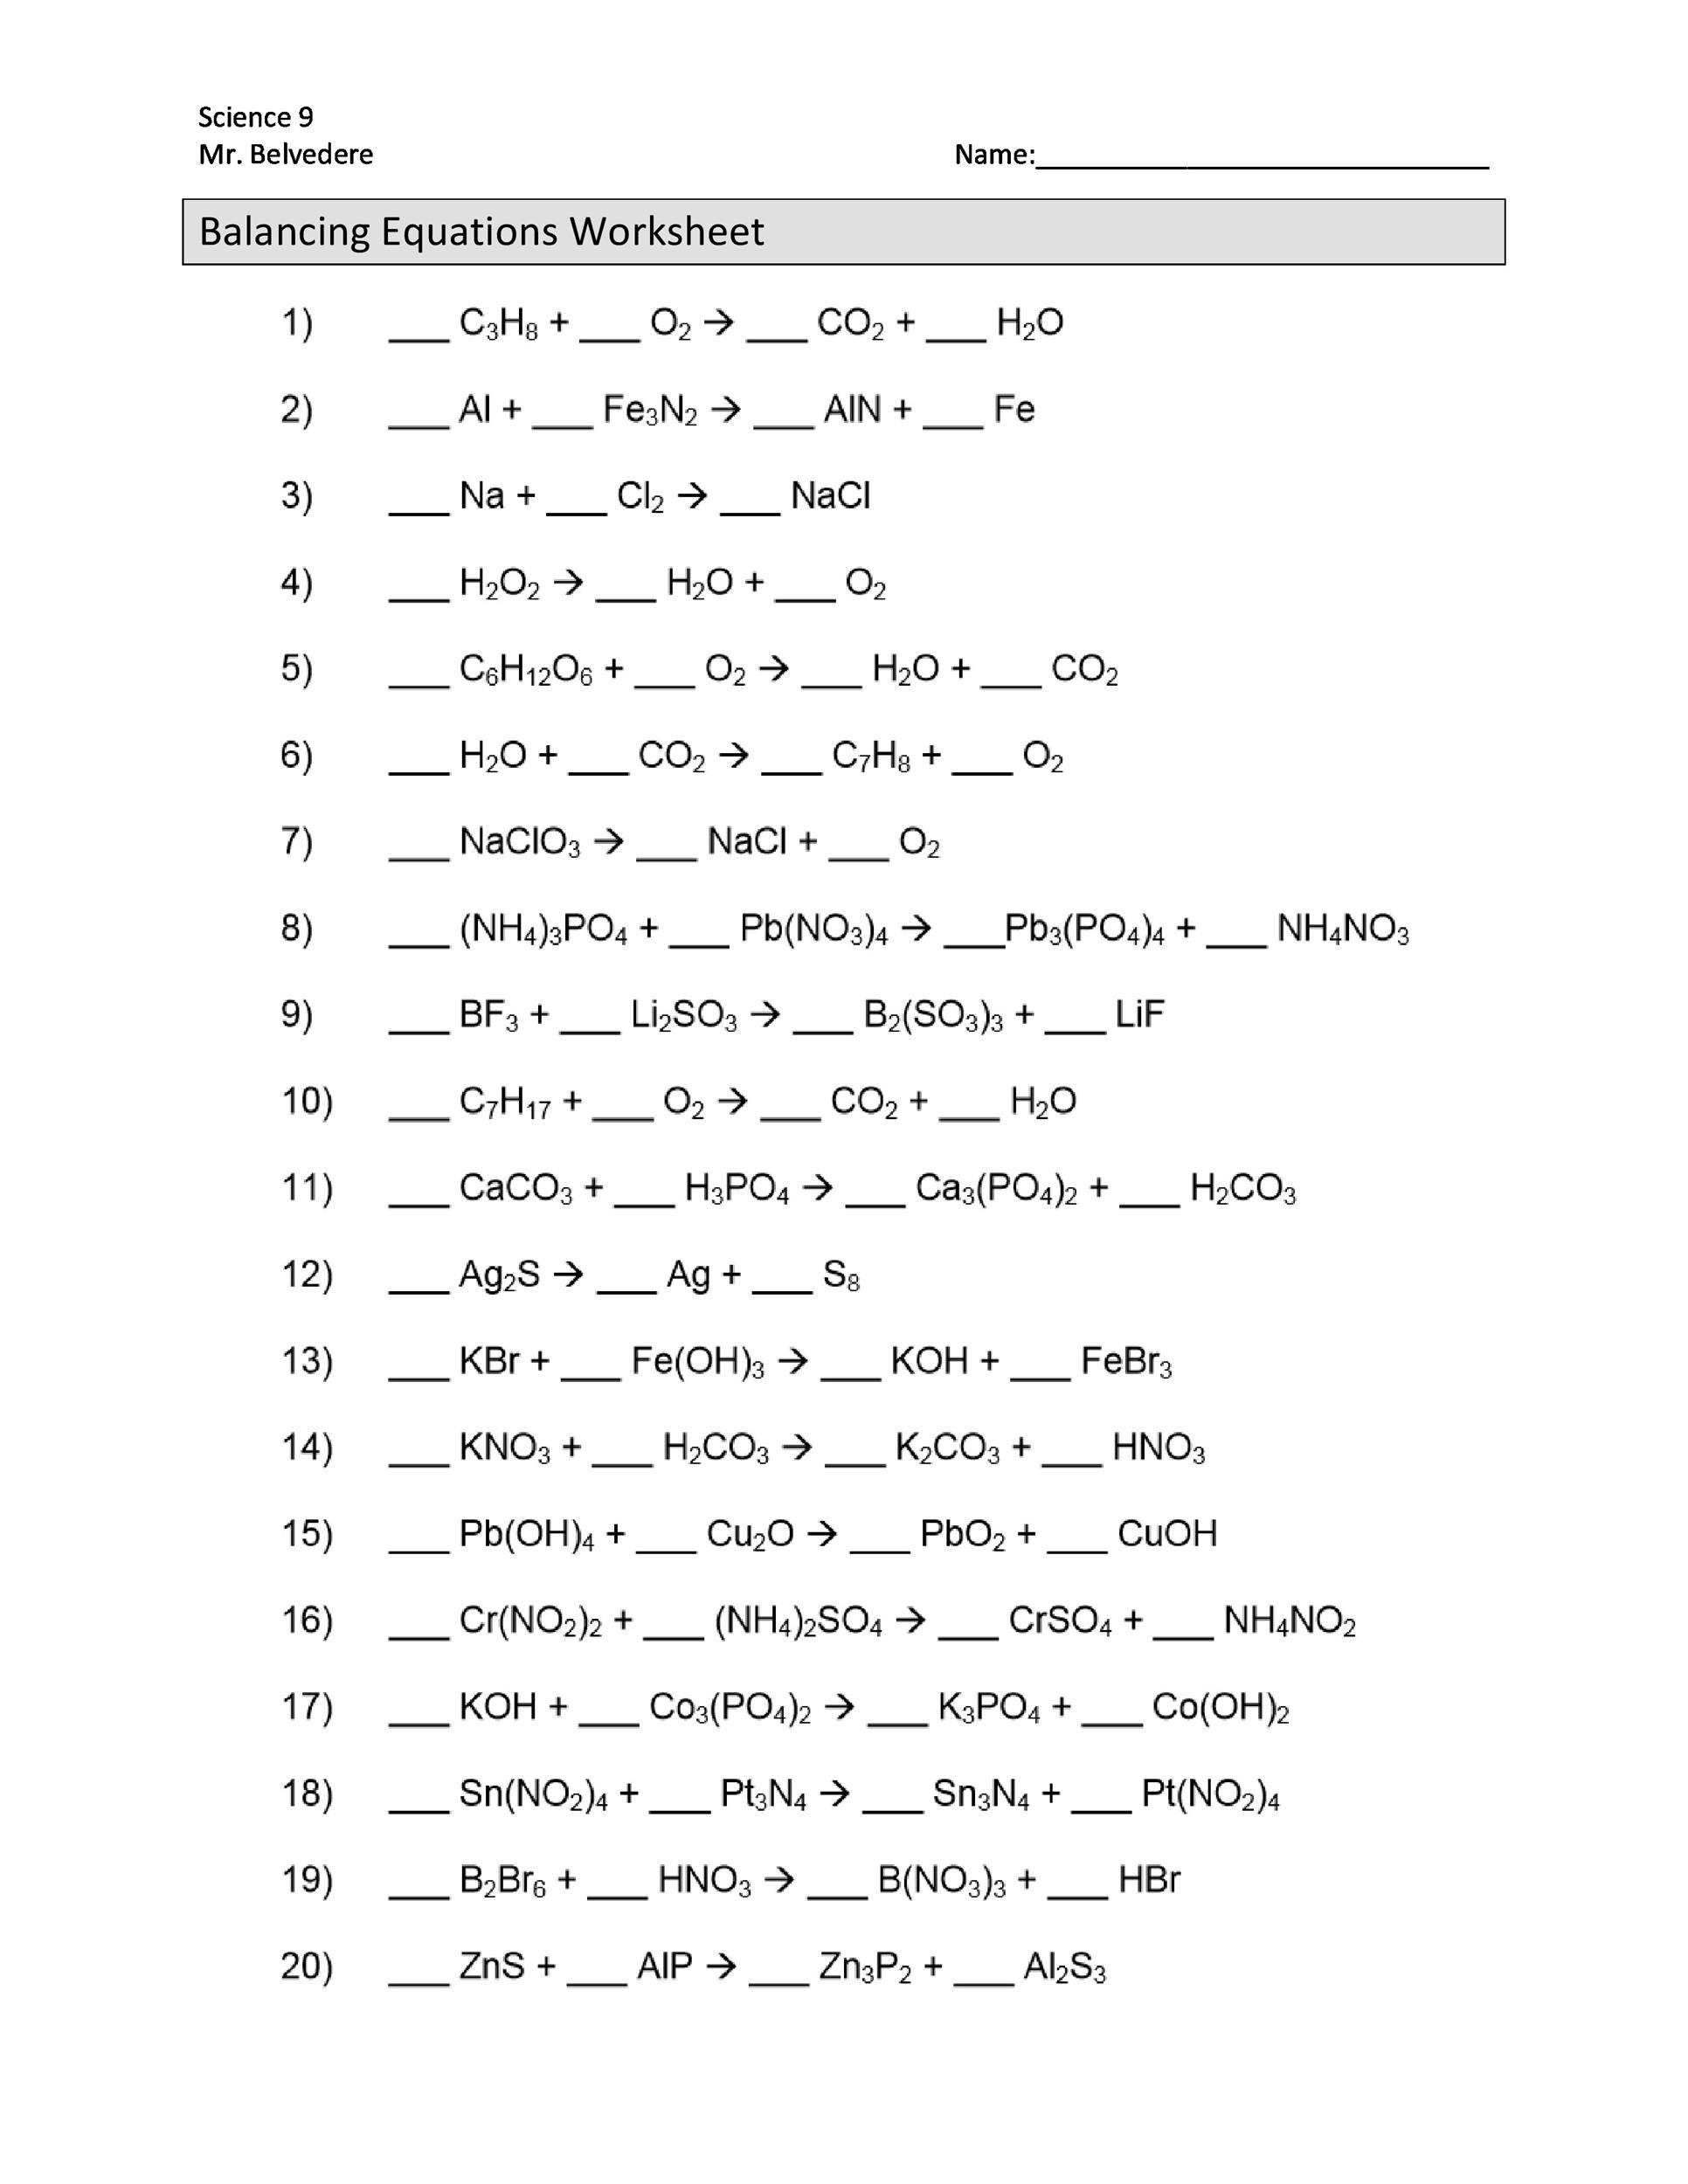 Science 8 Density Calculations Worksheet Law Conservation Mass Worksheet for Middle School